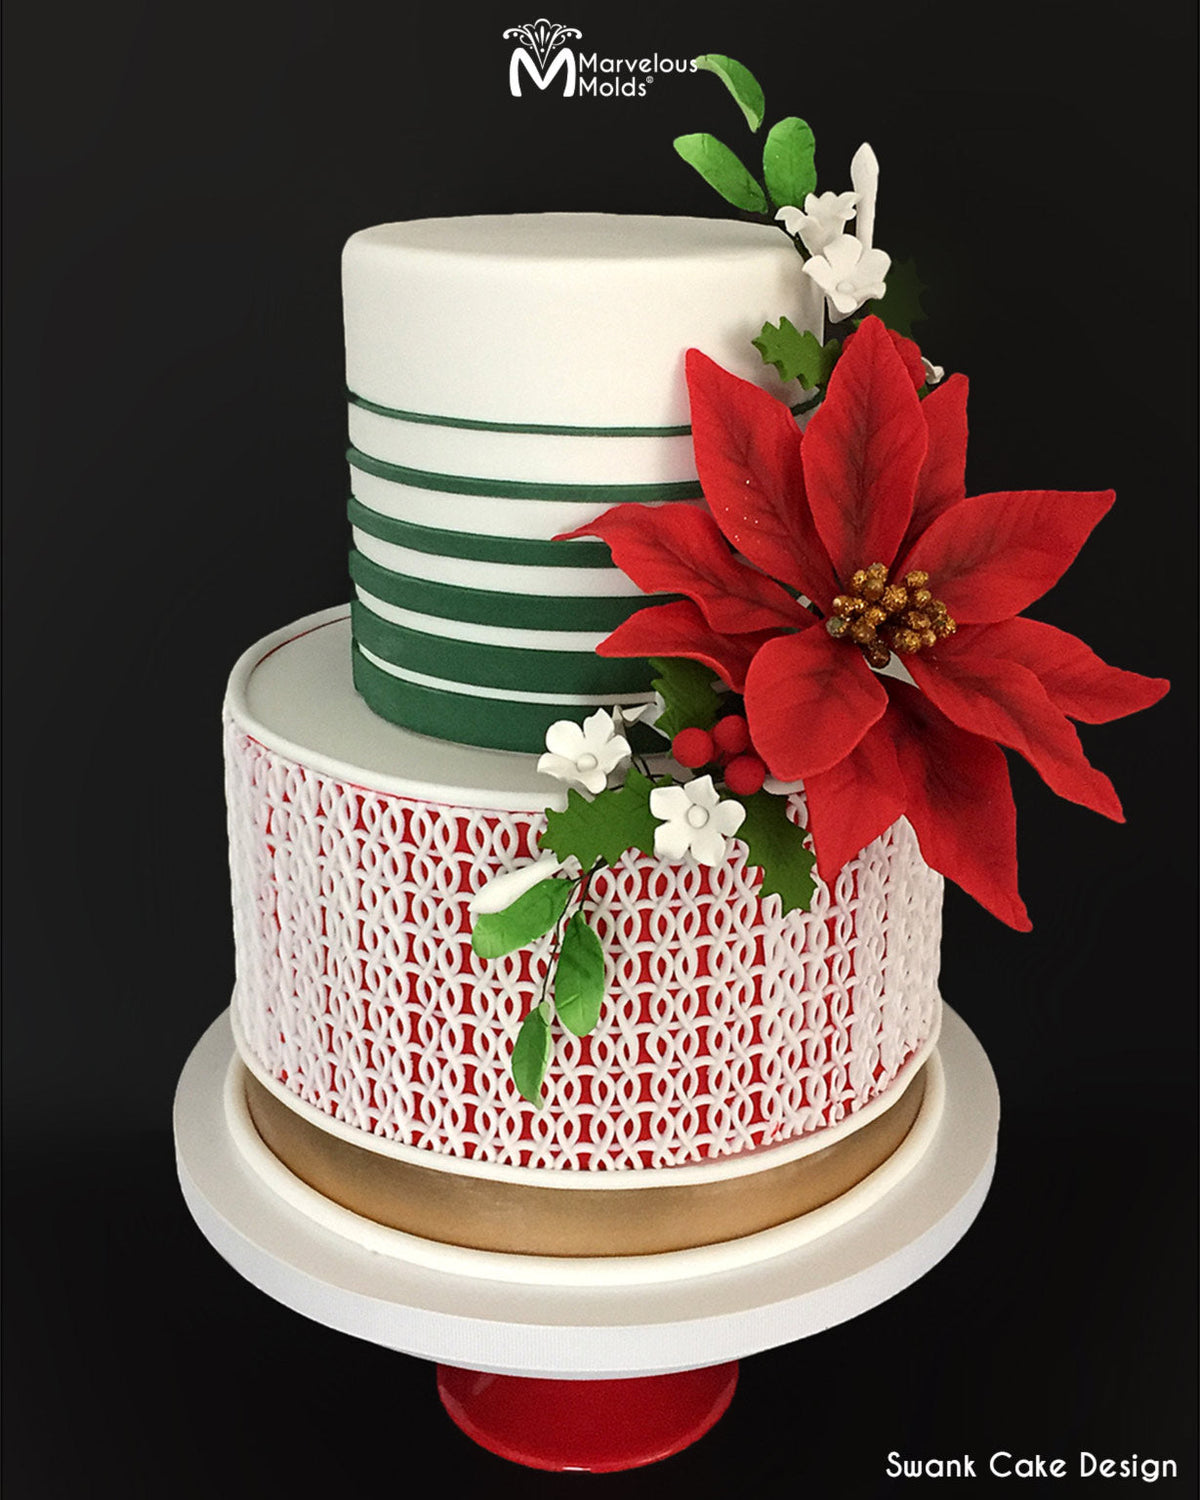 Christmas Cake with Poinsettia Cake Topper Decorated with Marvelous Molds Rise Silicone Onlay